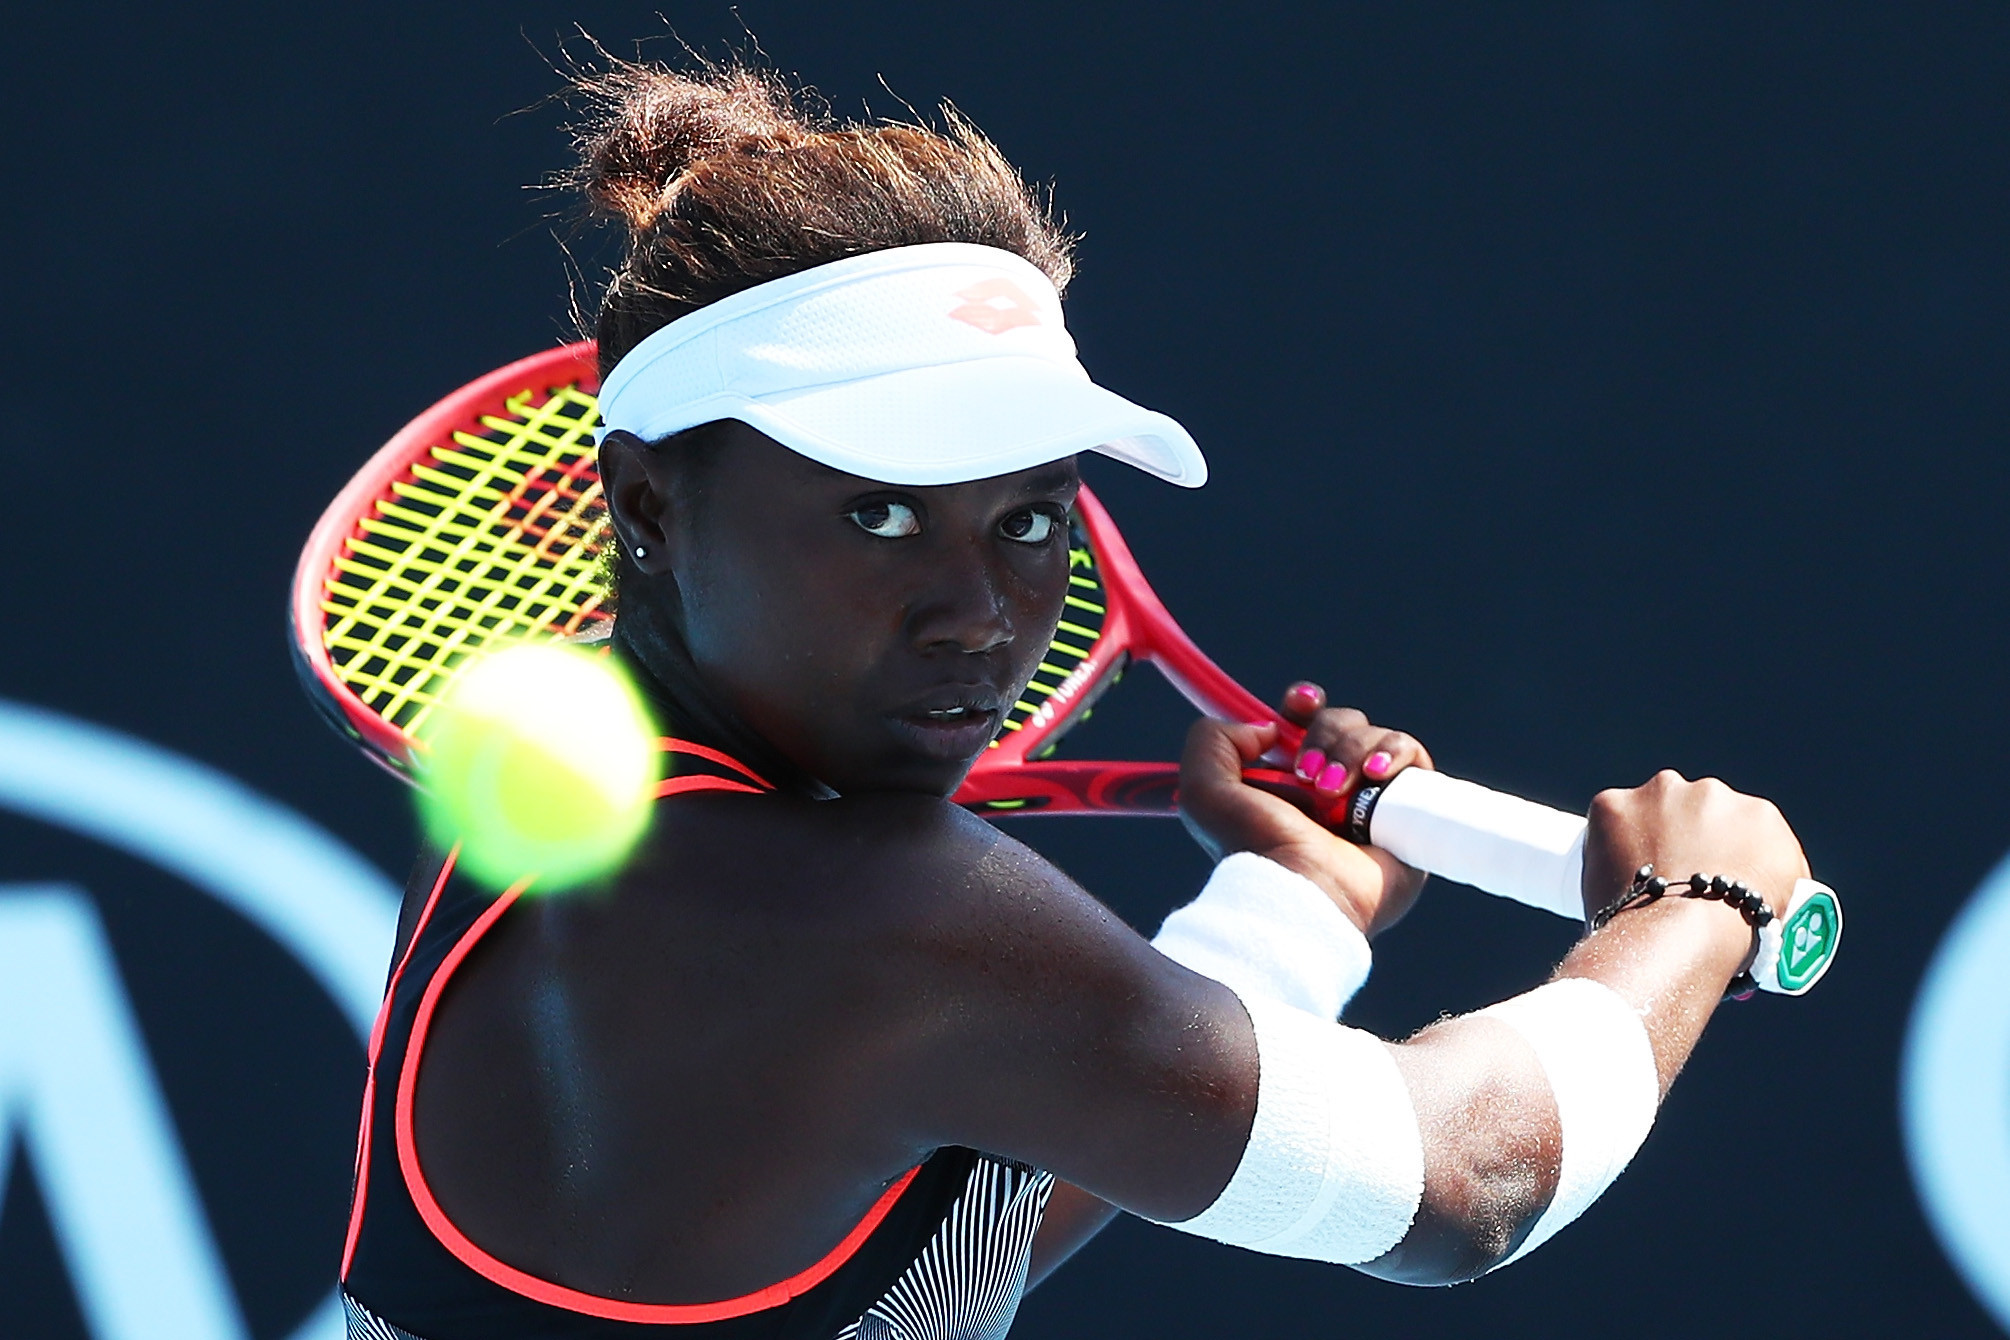 Sadi Nahmana is one of the best tennis players in Africa ©Getty Images